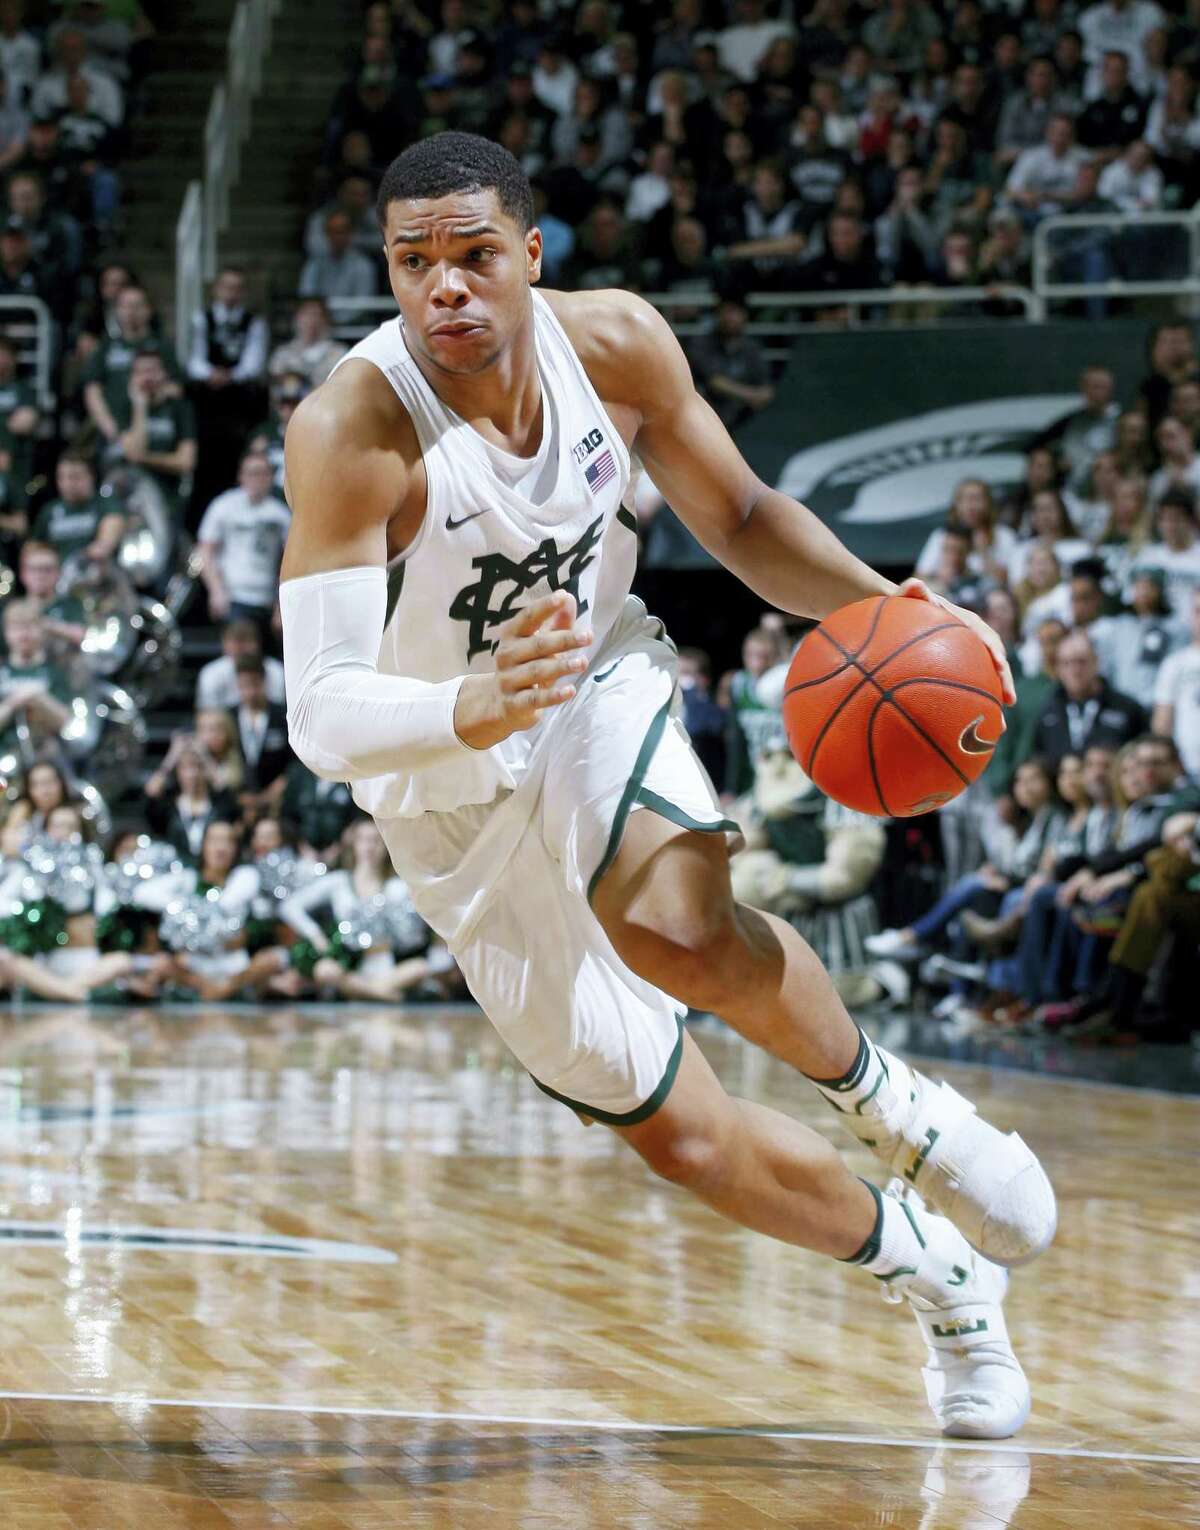 In this Feb. 26, 2017 photo, Michigan State’s Miles Bridges drives during the second half of an NCAA college basketball game against Wisconsin, in East Lansing, Mich. Bridges was selected as newcomer of the year for the Big Ten Conference on March 7, 2017.